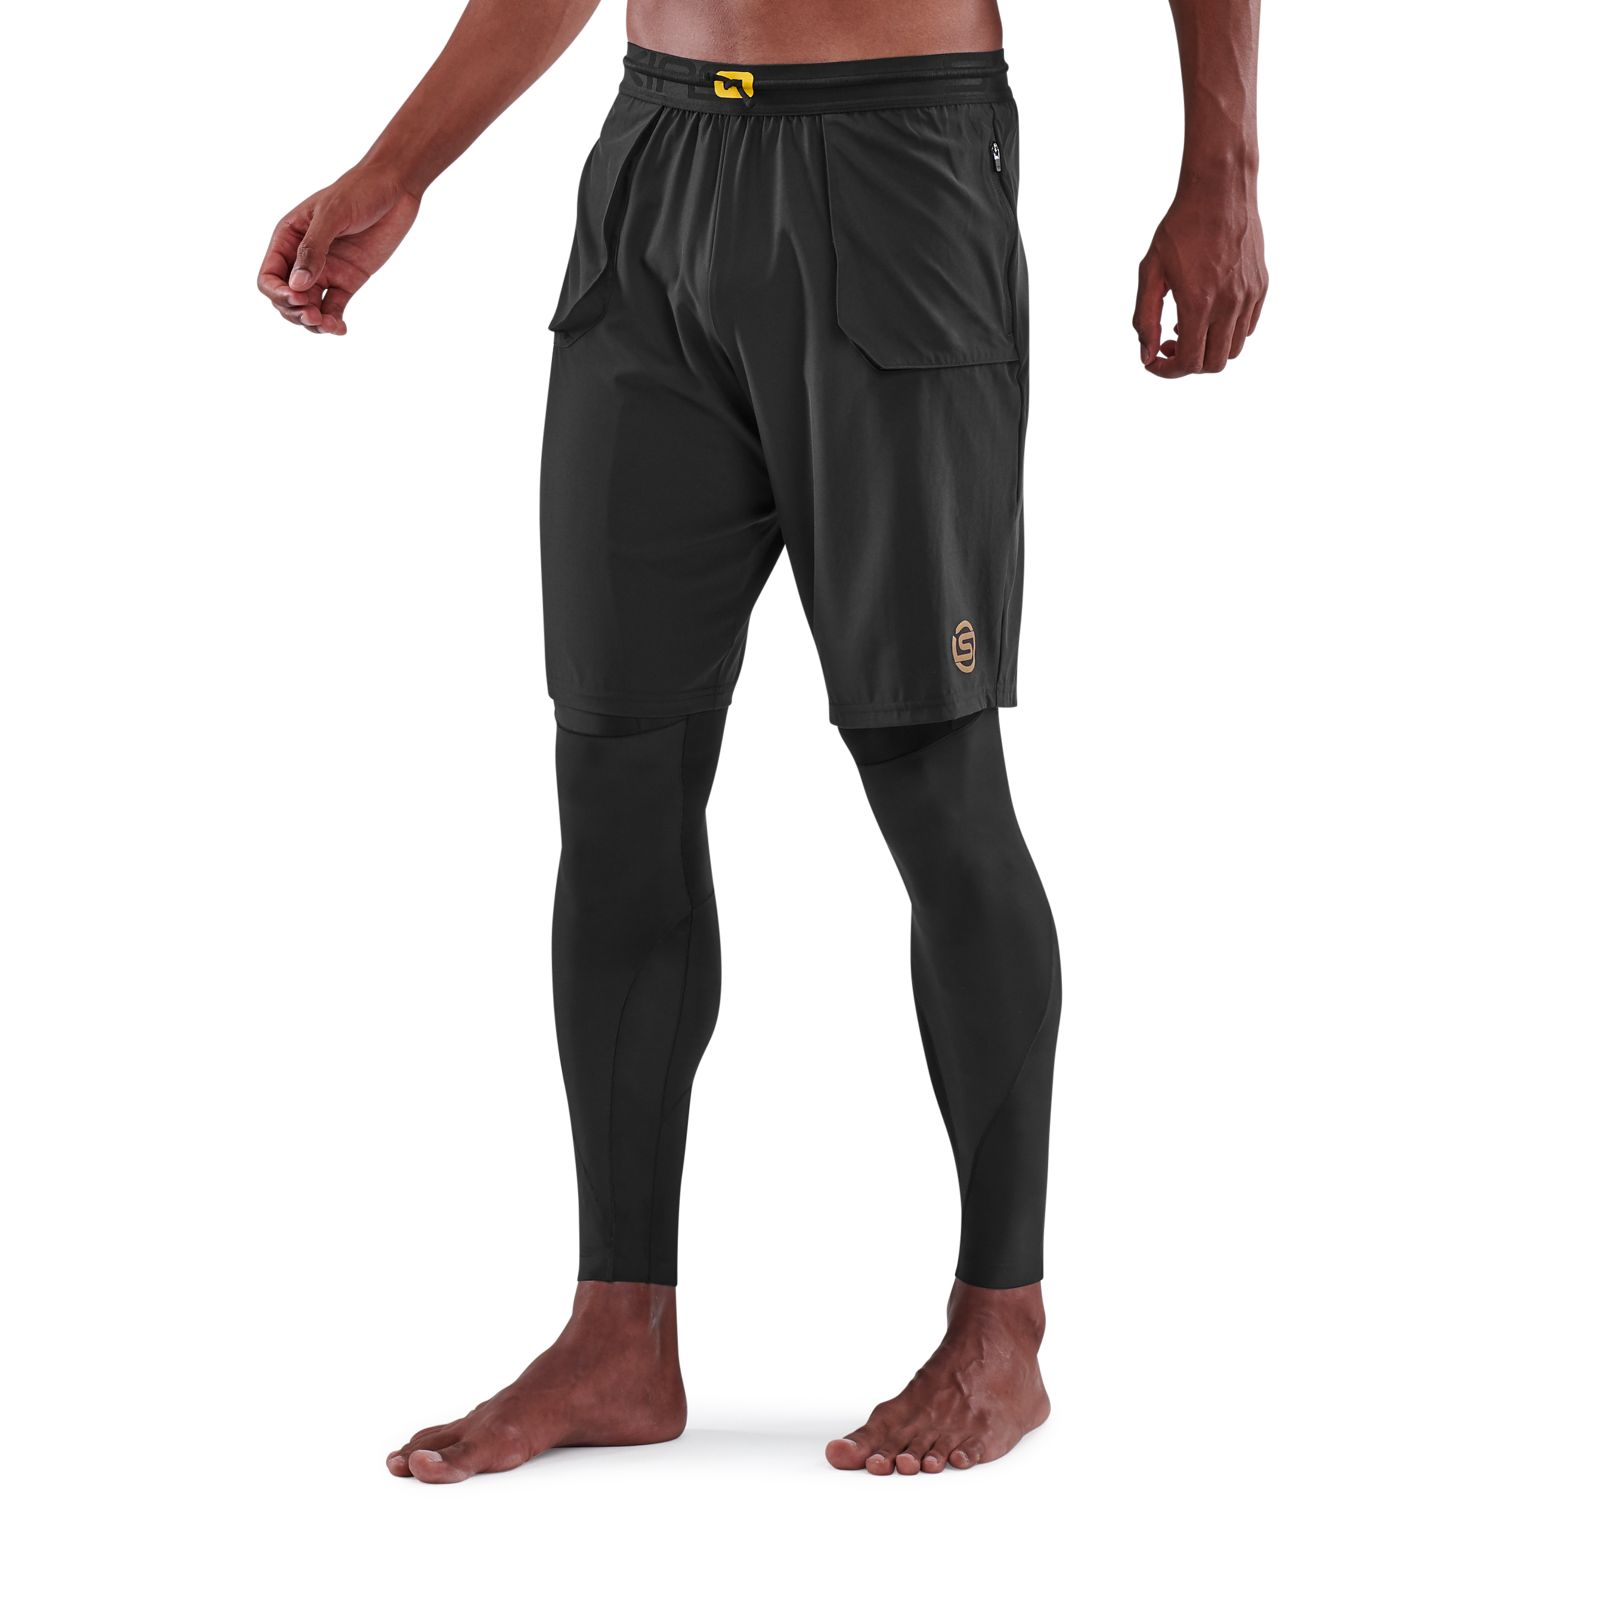 SKINS SERIES-5 MEN'S TRAVEL AND RECOVERY LONG TIGHTS BLACK